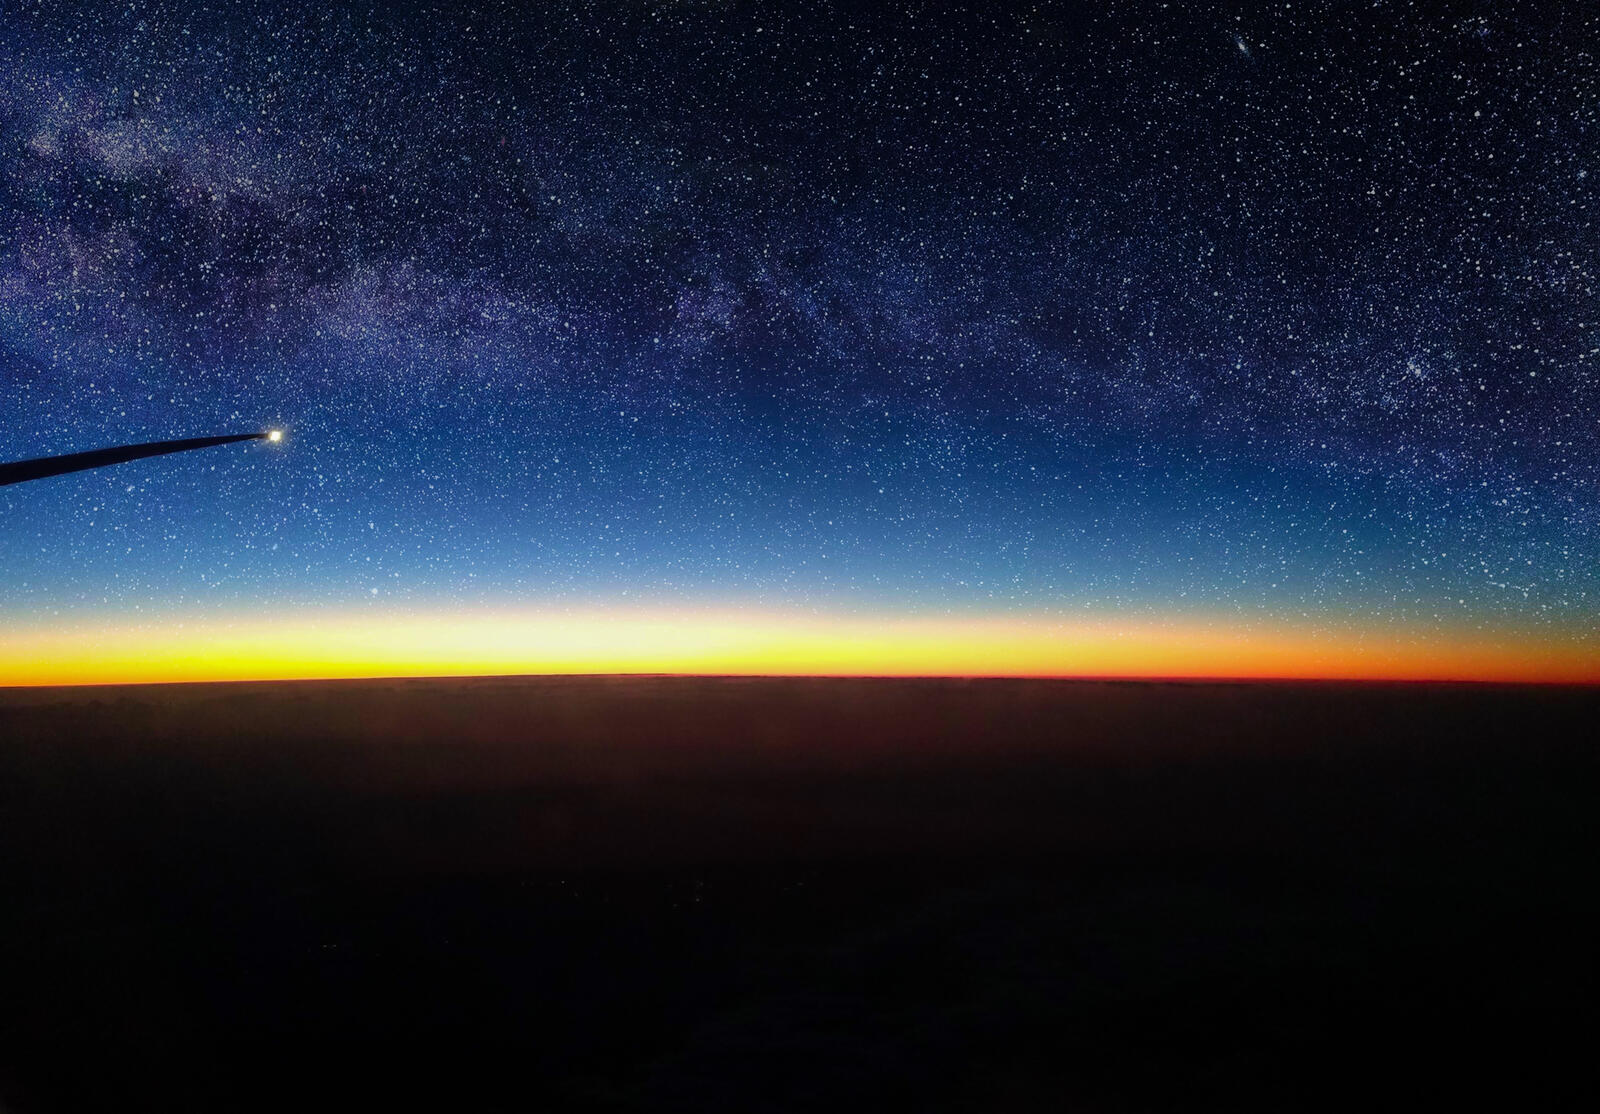 Wallpapers air see the stars sunrise on the desktop